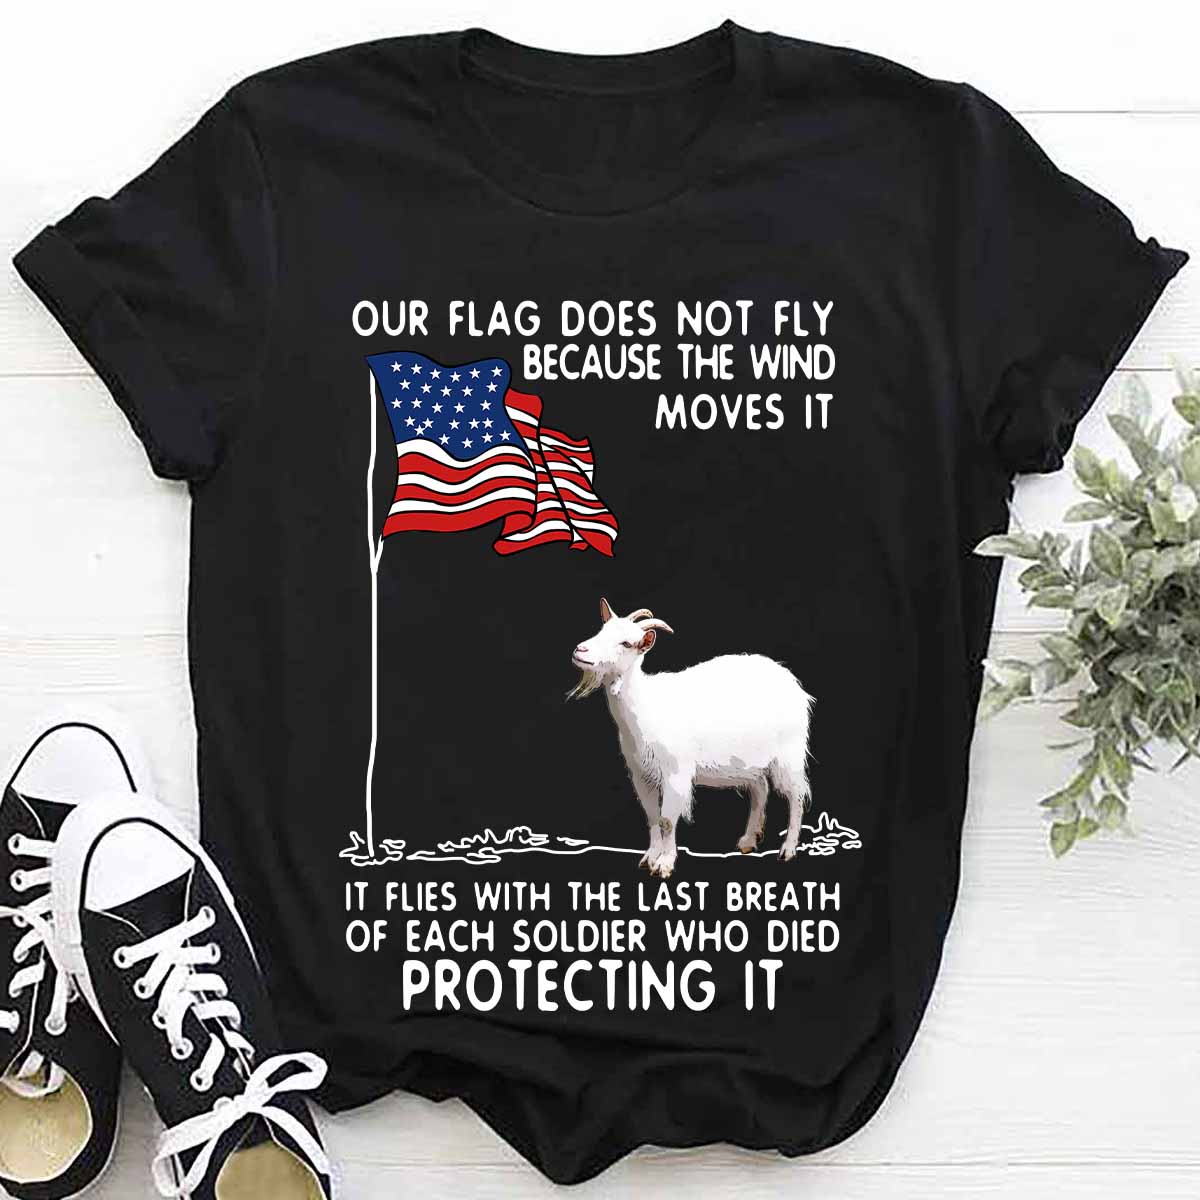 Our flag does not fly because the wind moves it - America flag, goat lover